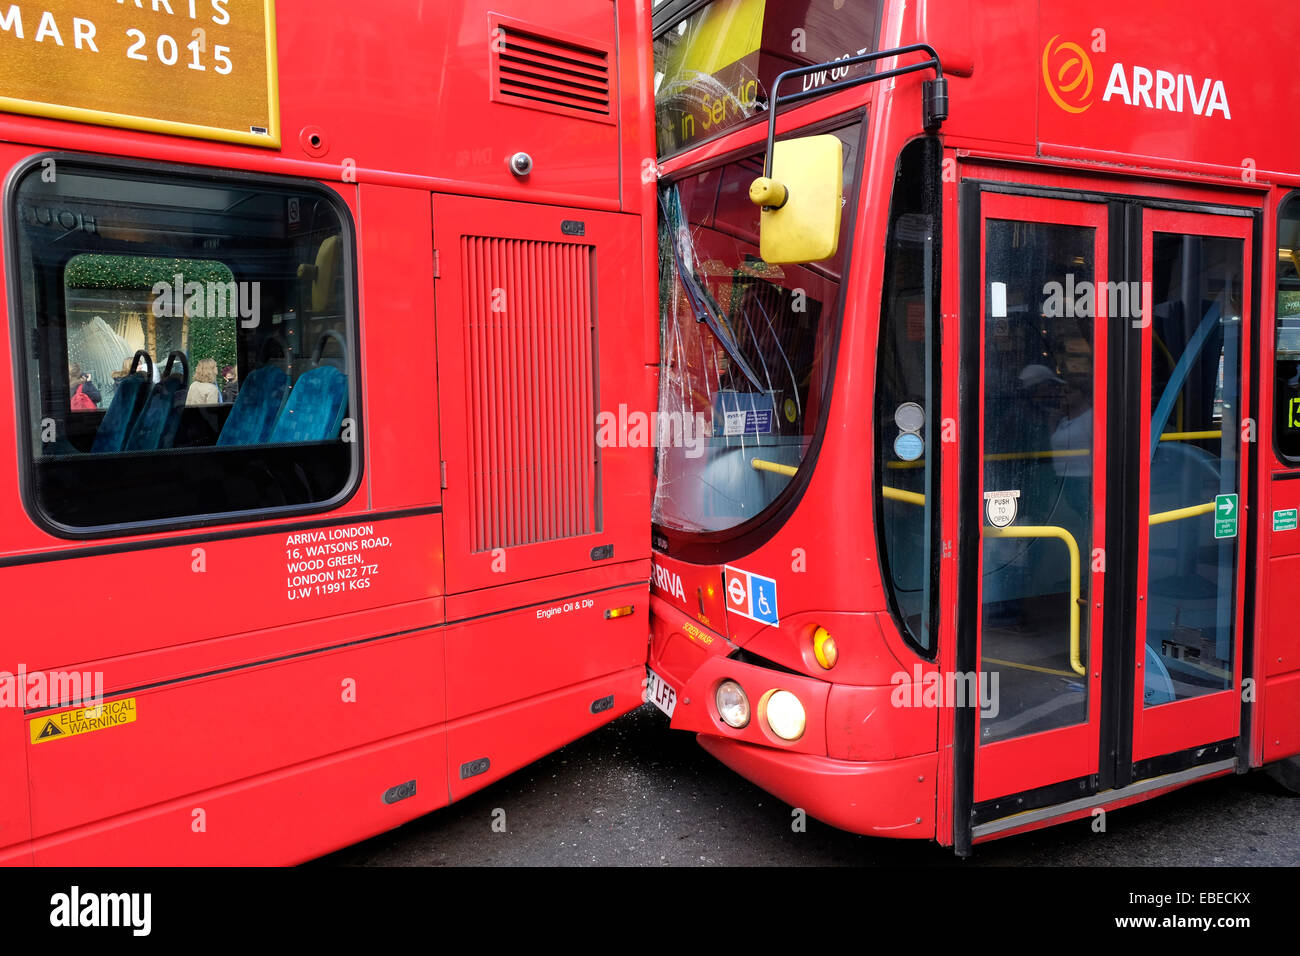 Two double decker buses collide, central London, UK Stock Photo